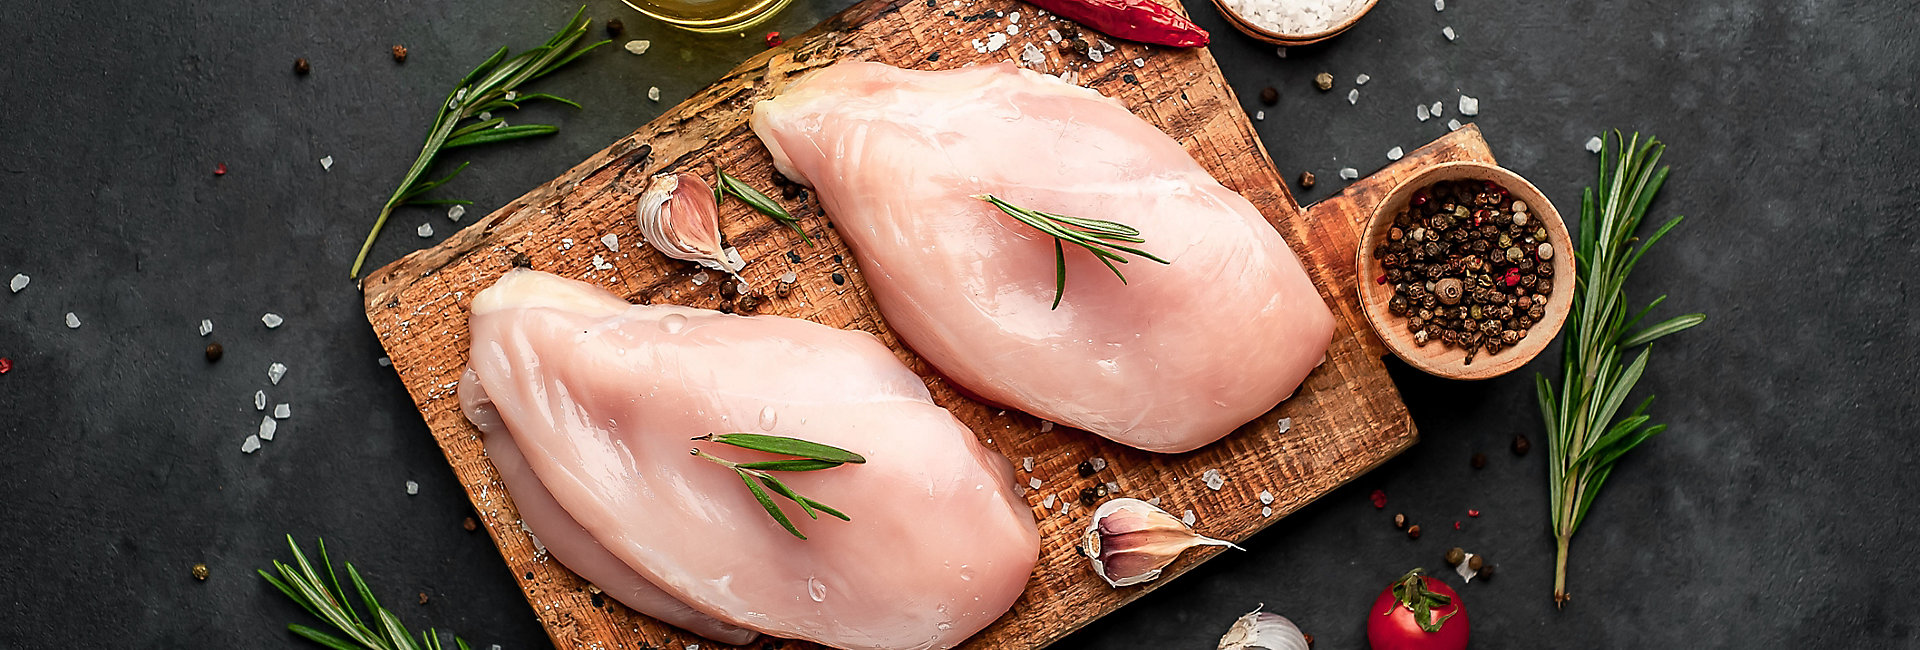 
Raw chicken fillet on a cutting board with rosemary, spices, tomatoes and pepper on a stone background; Shutterstock ID 1582498705; purchase_order: KFT; job: Europe; client: Marketing